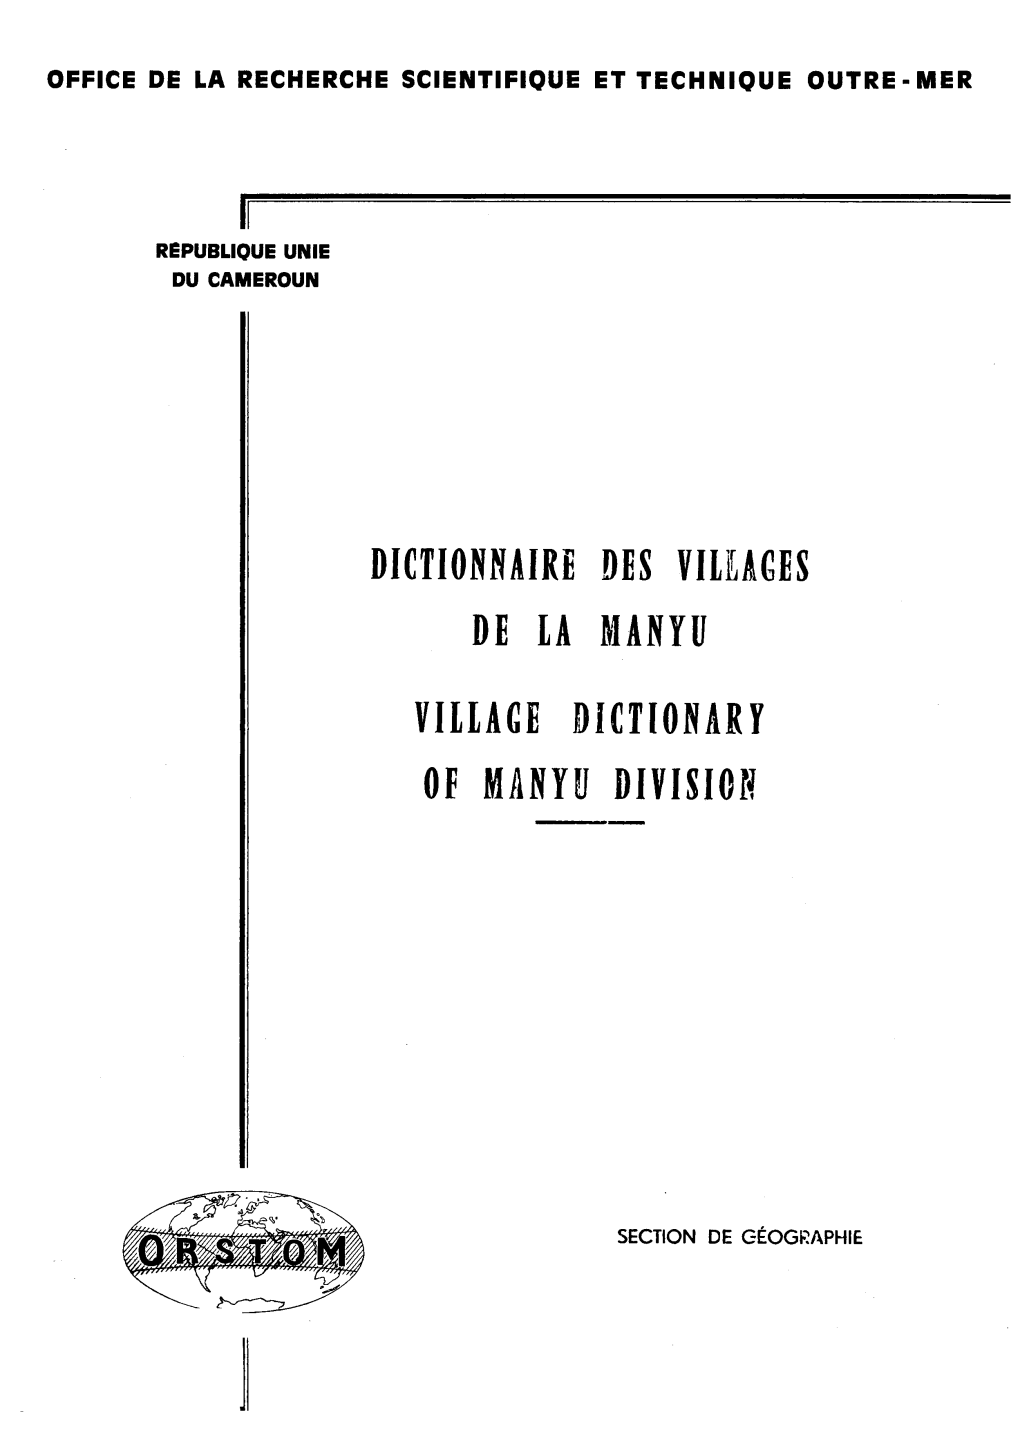 Village Dictionary of Manyu Division